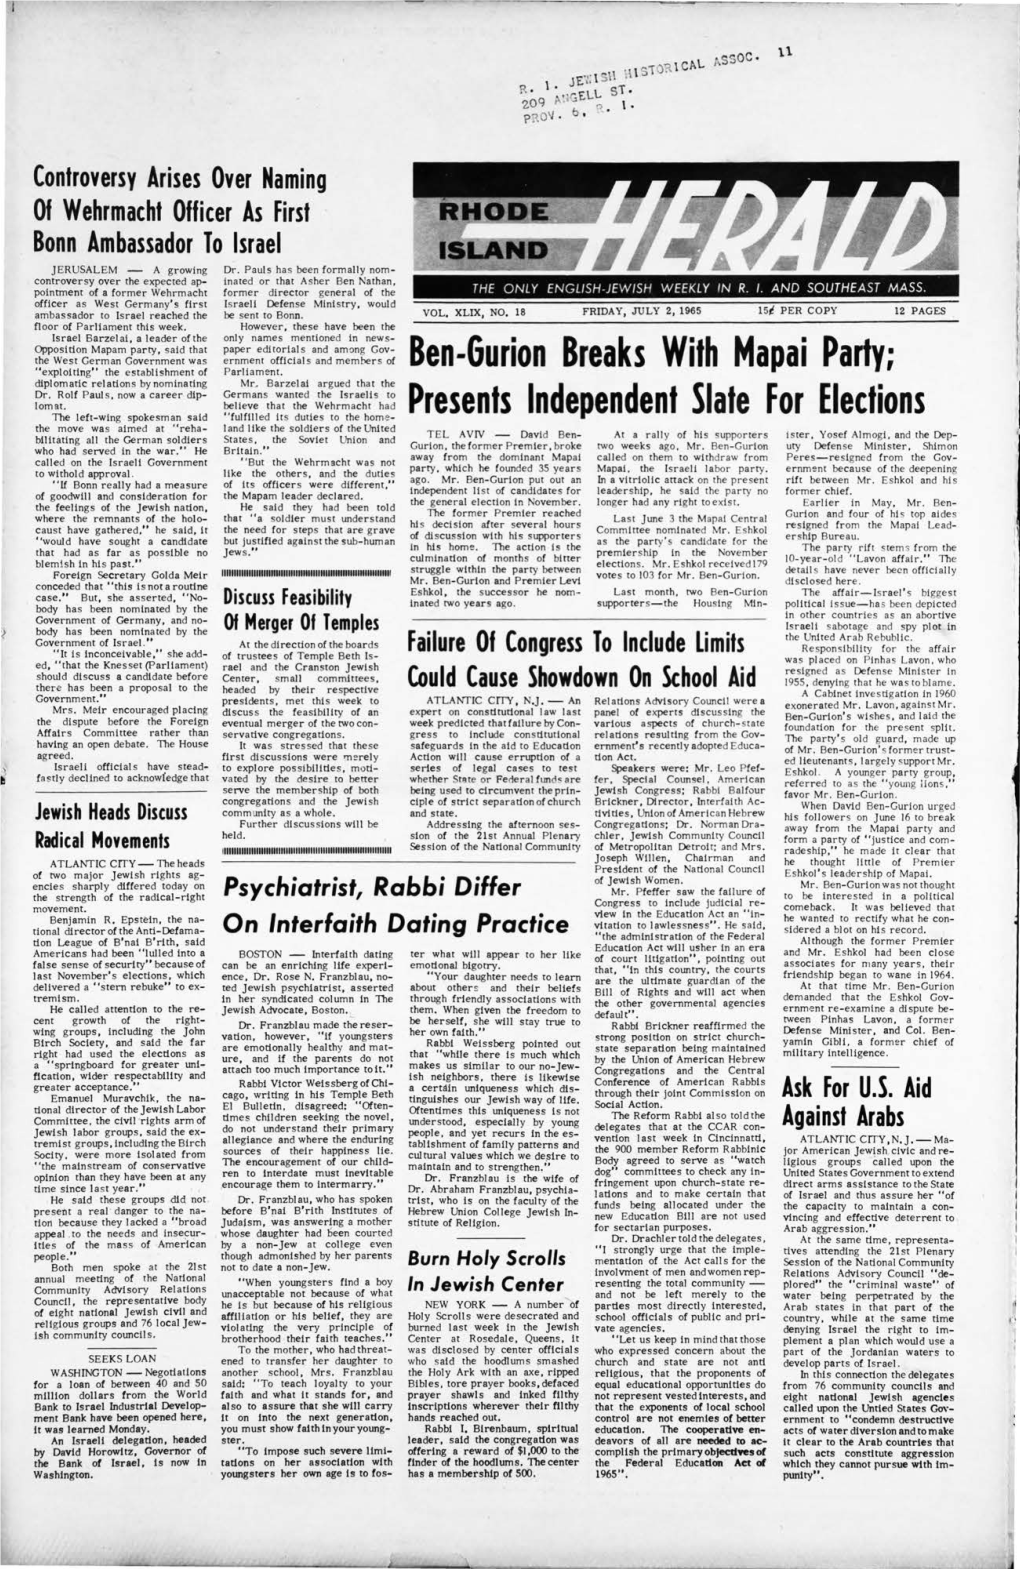 JULY 2, 1965 15E PER COPY 12 PAGES Floor of Parliament This Week